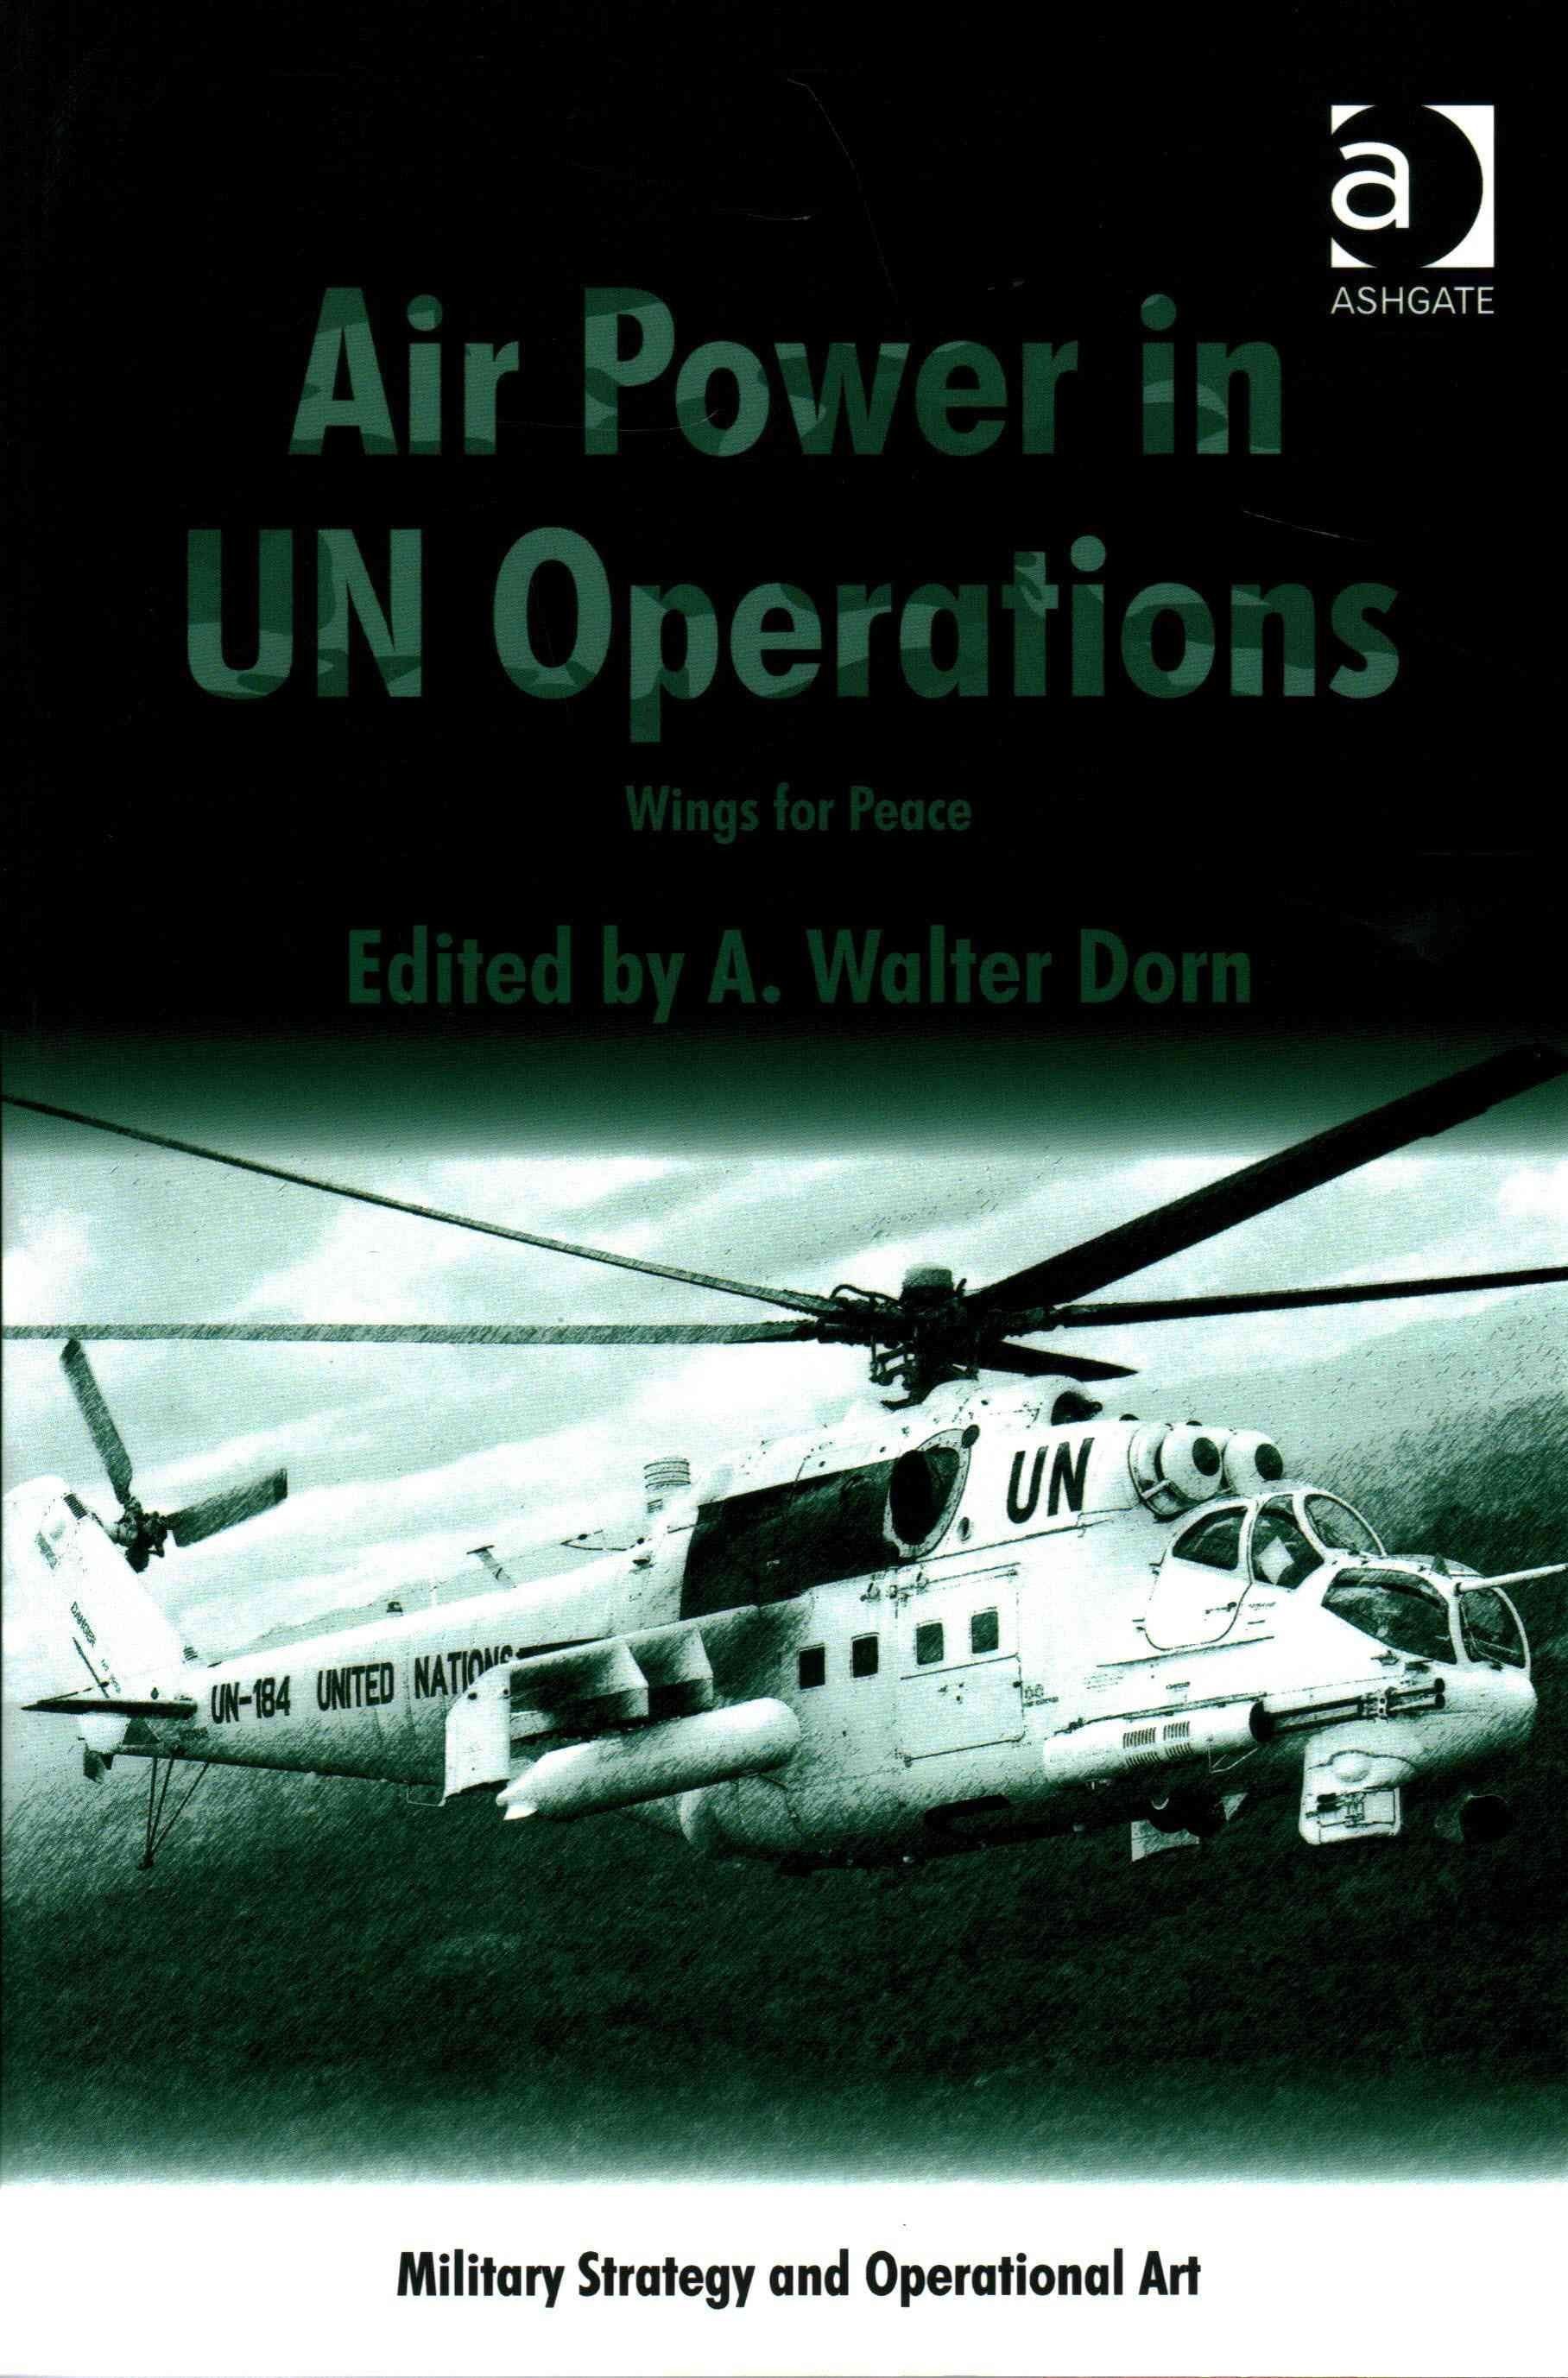 Air Power in UN Operations